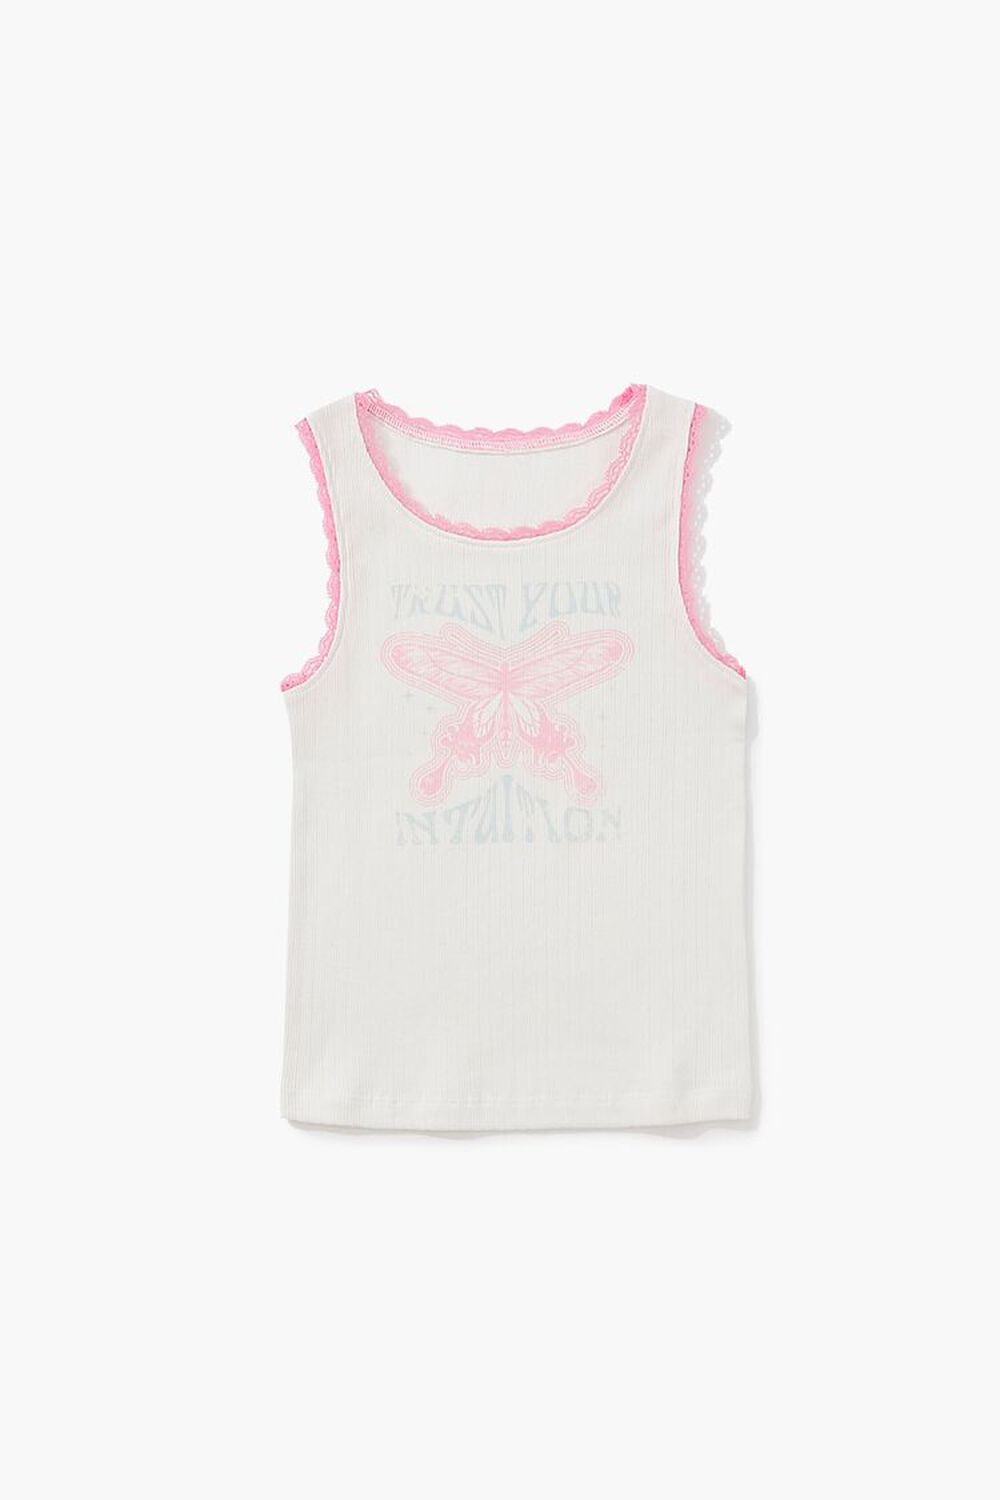 CREAM/MULTI Girls Butterfly Graphic Tank Top (Kids), image 1